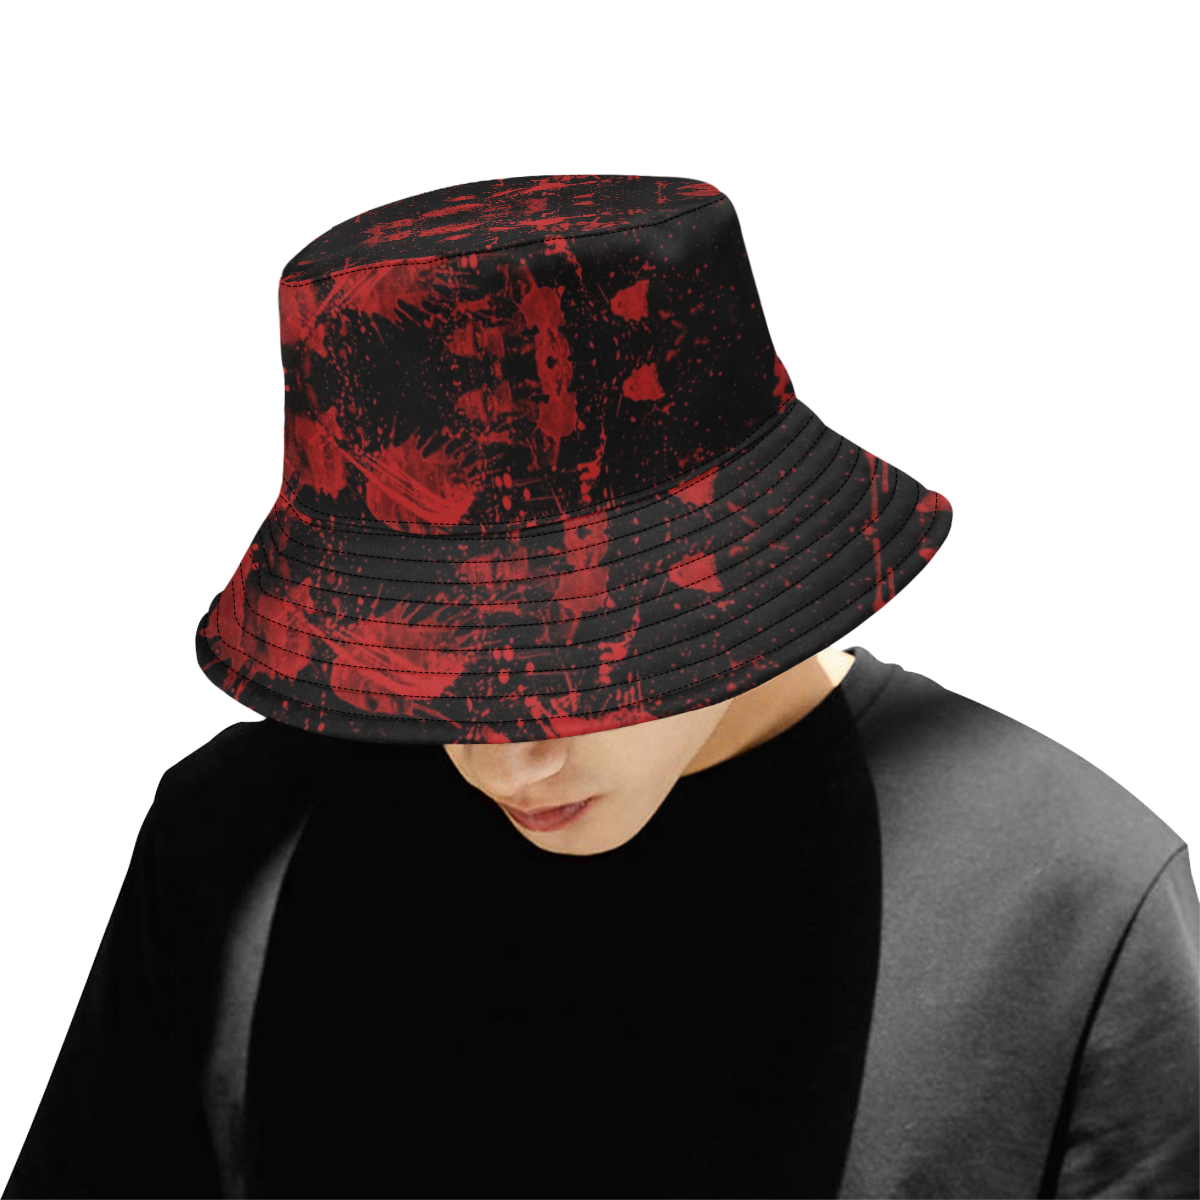 Scary Blood by Artdream All Over Print Bucket Hat for Men